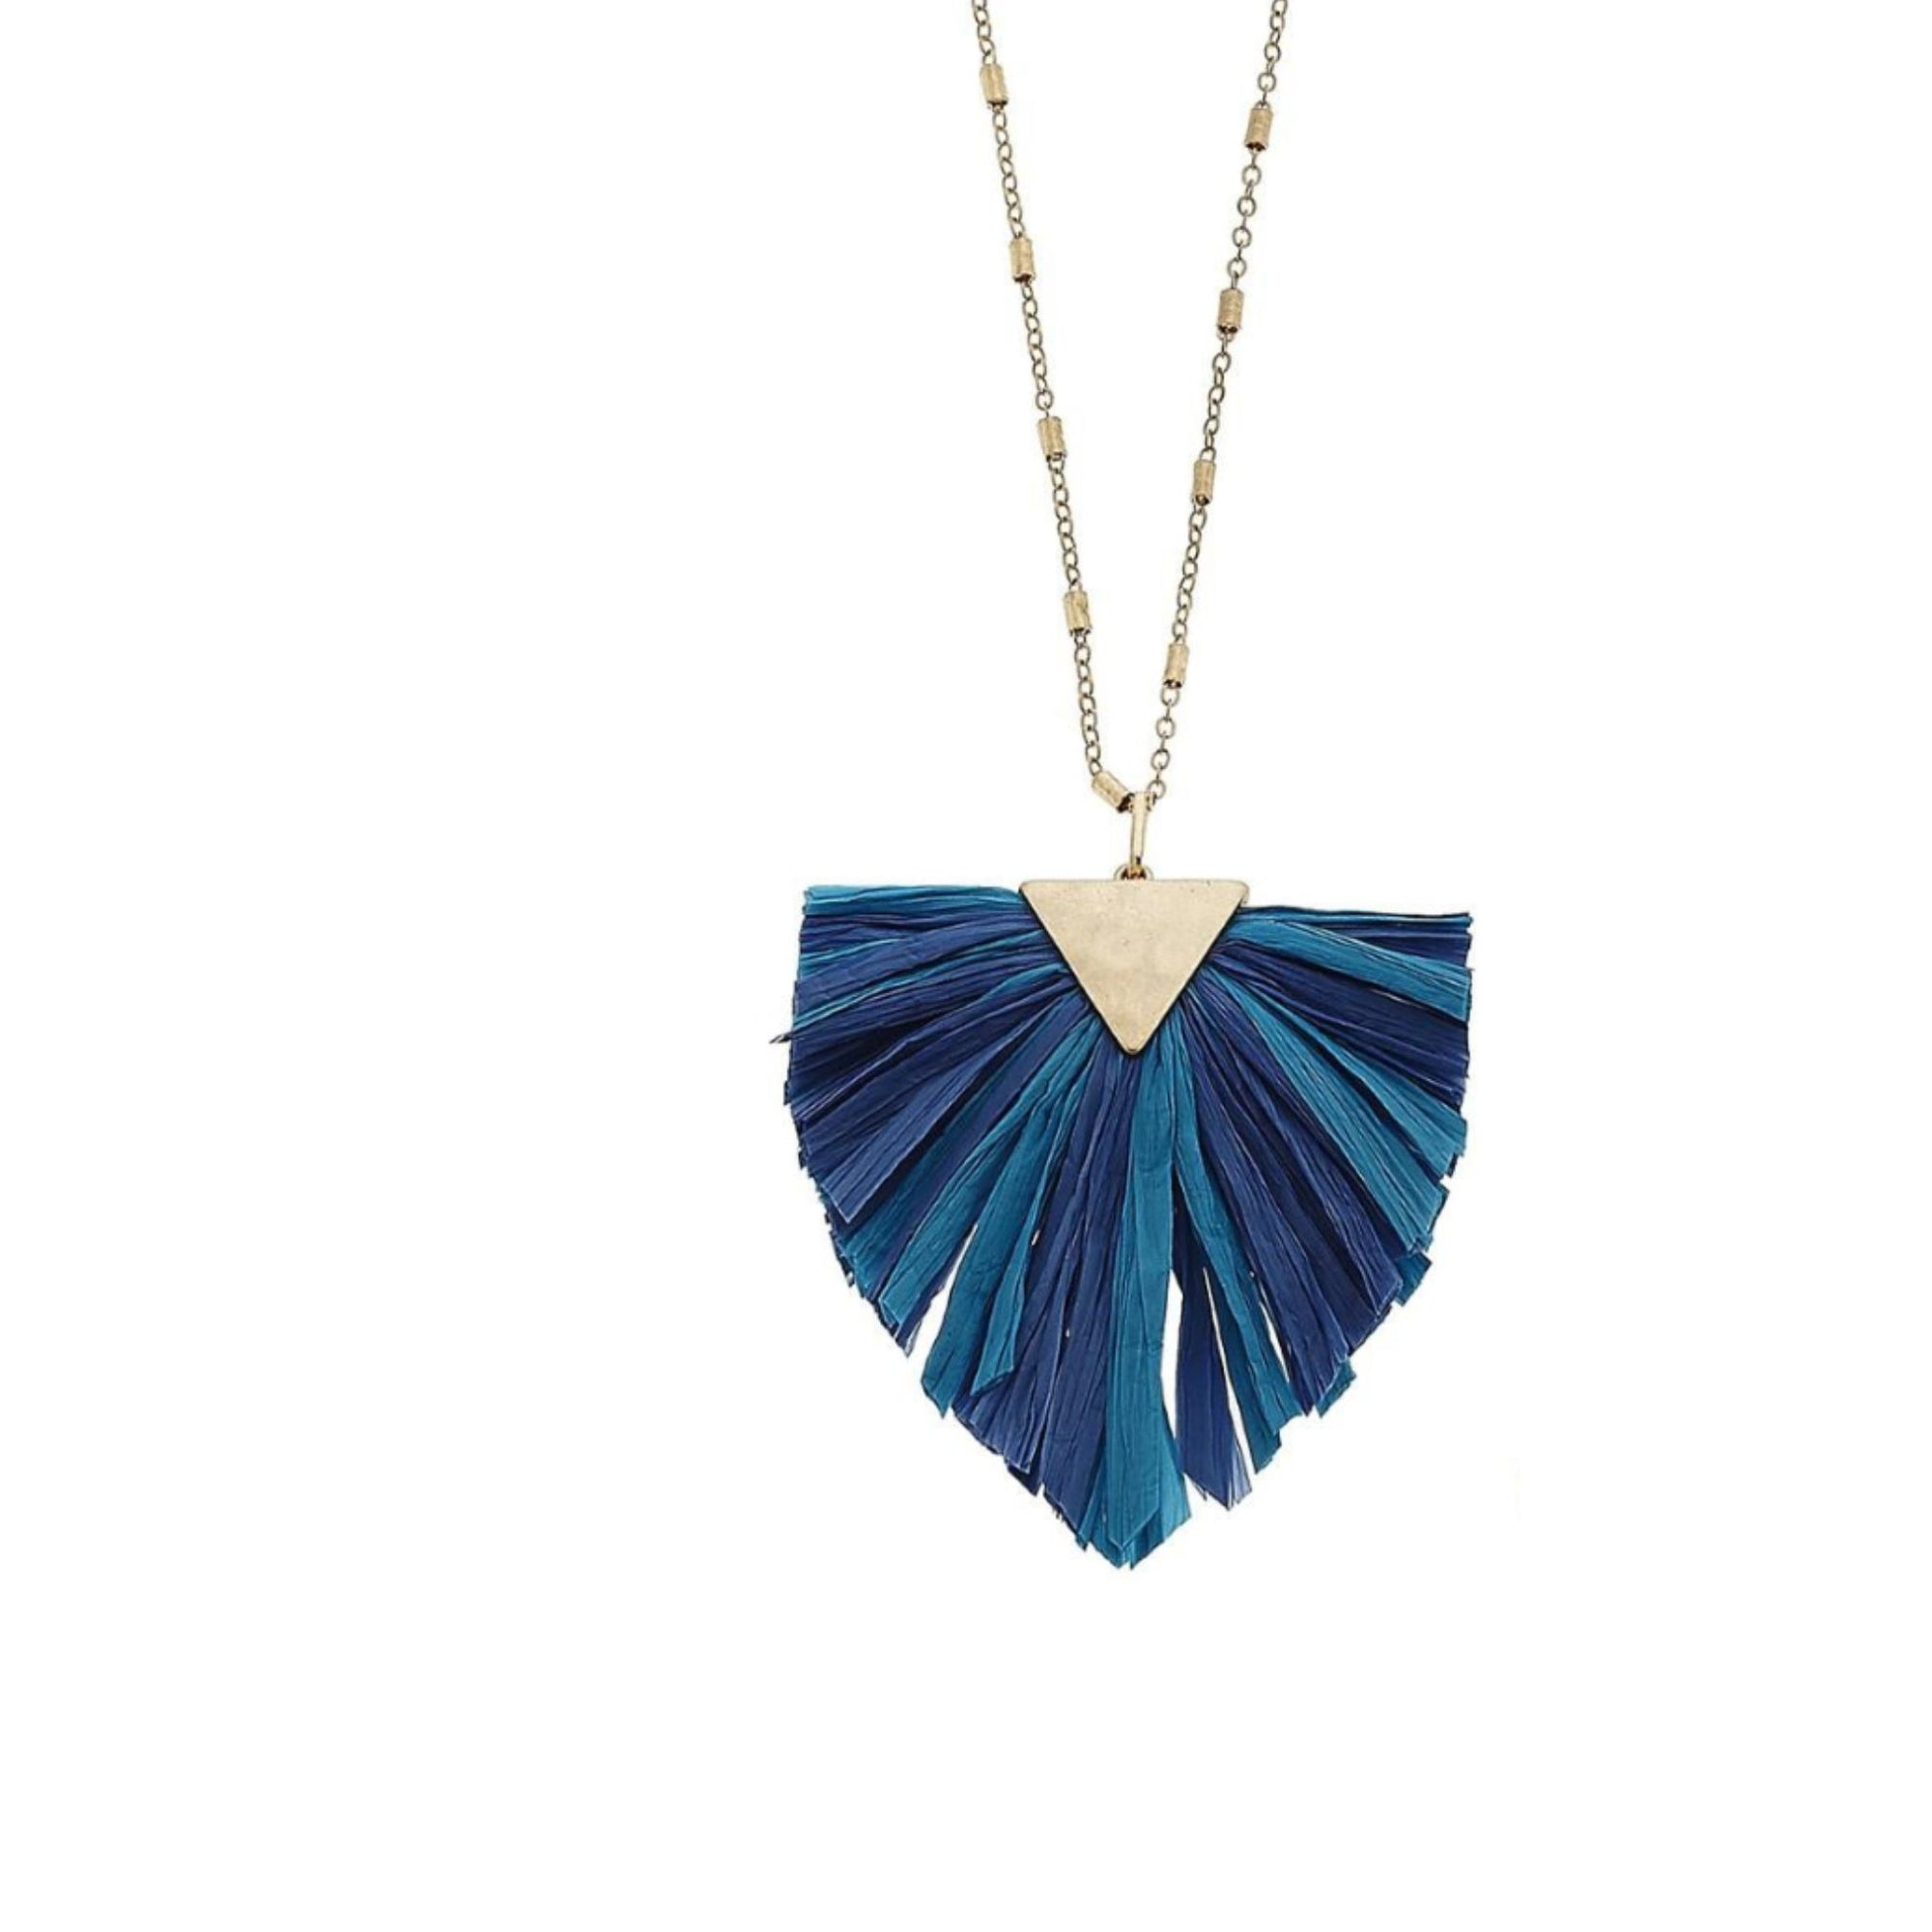 Long metal necklace featuring a raffia tassel pendant with gold accents